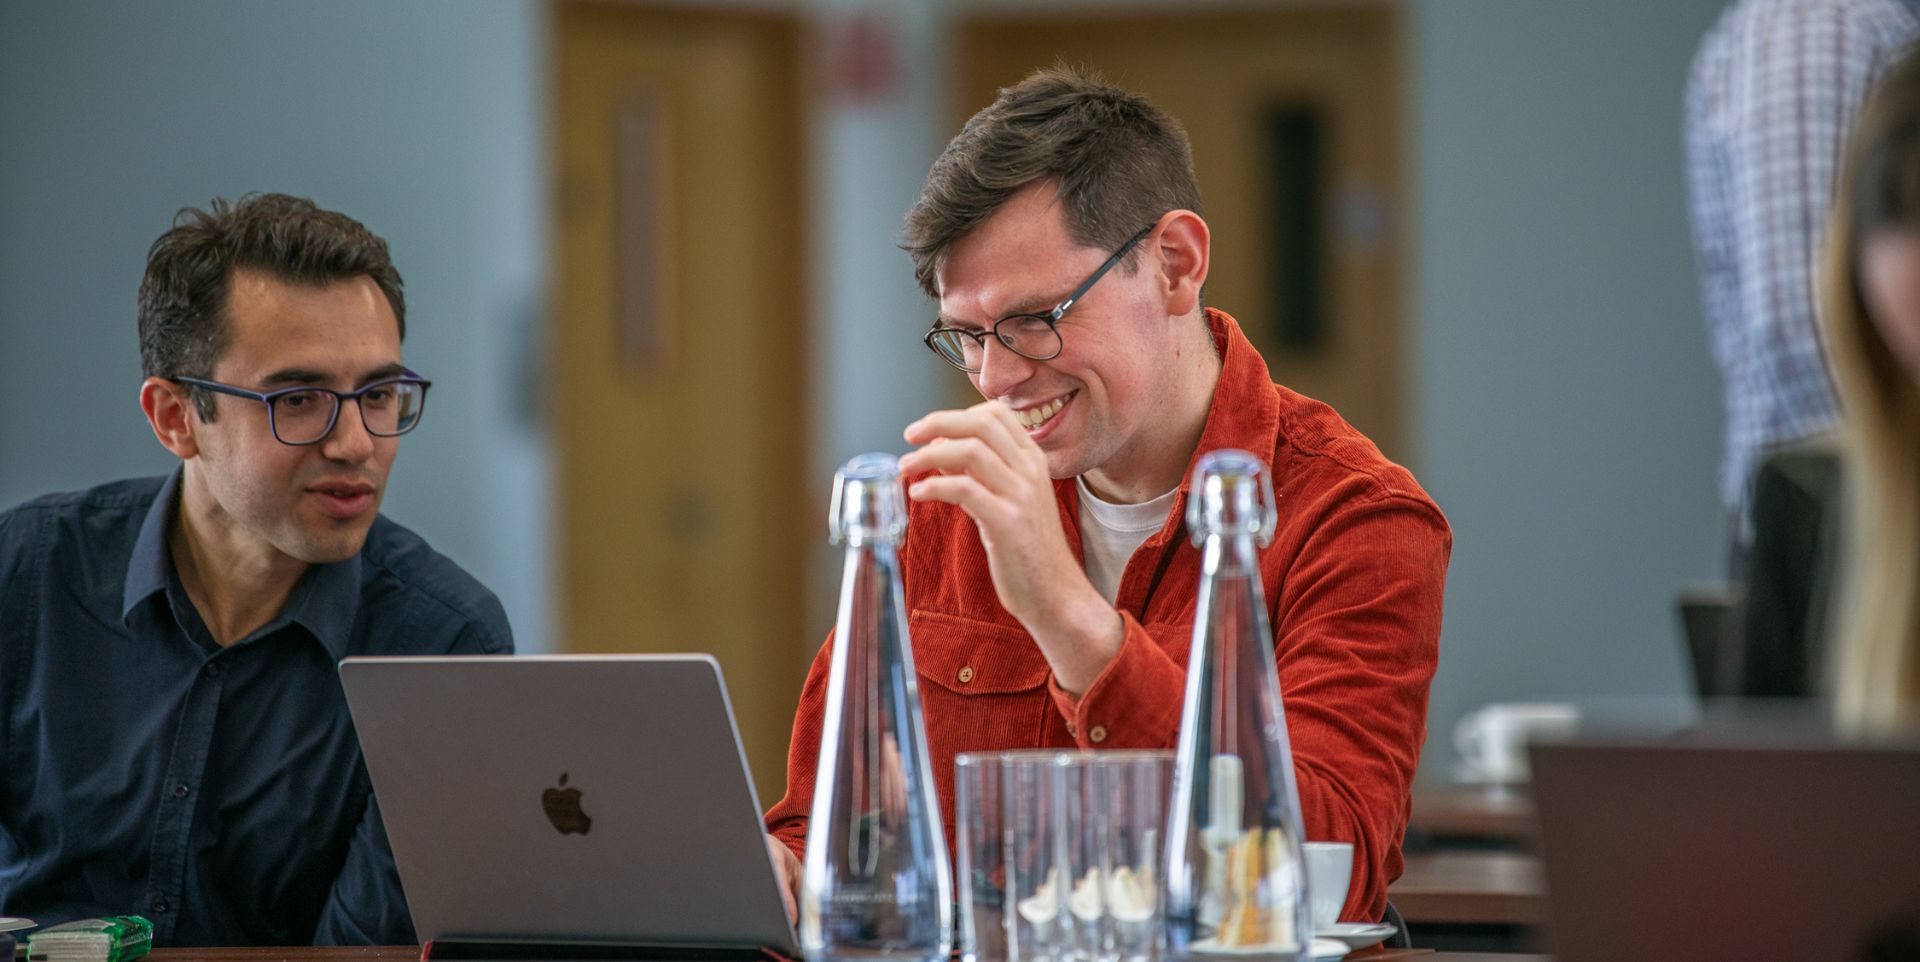 Life Sciences communications at Pioneer Group: image shows two men looking at a laptop screen during our neurotechnology accelerator programme.